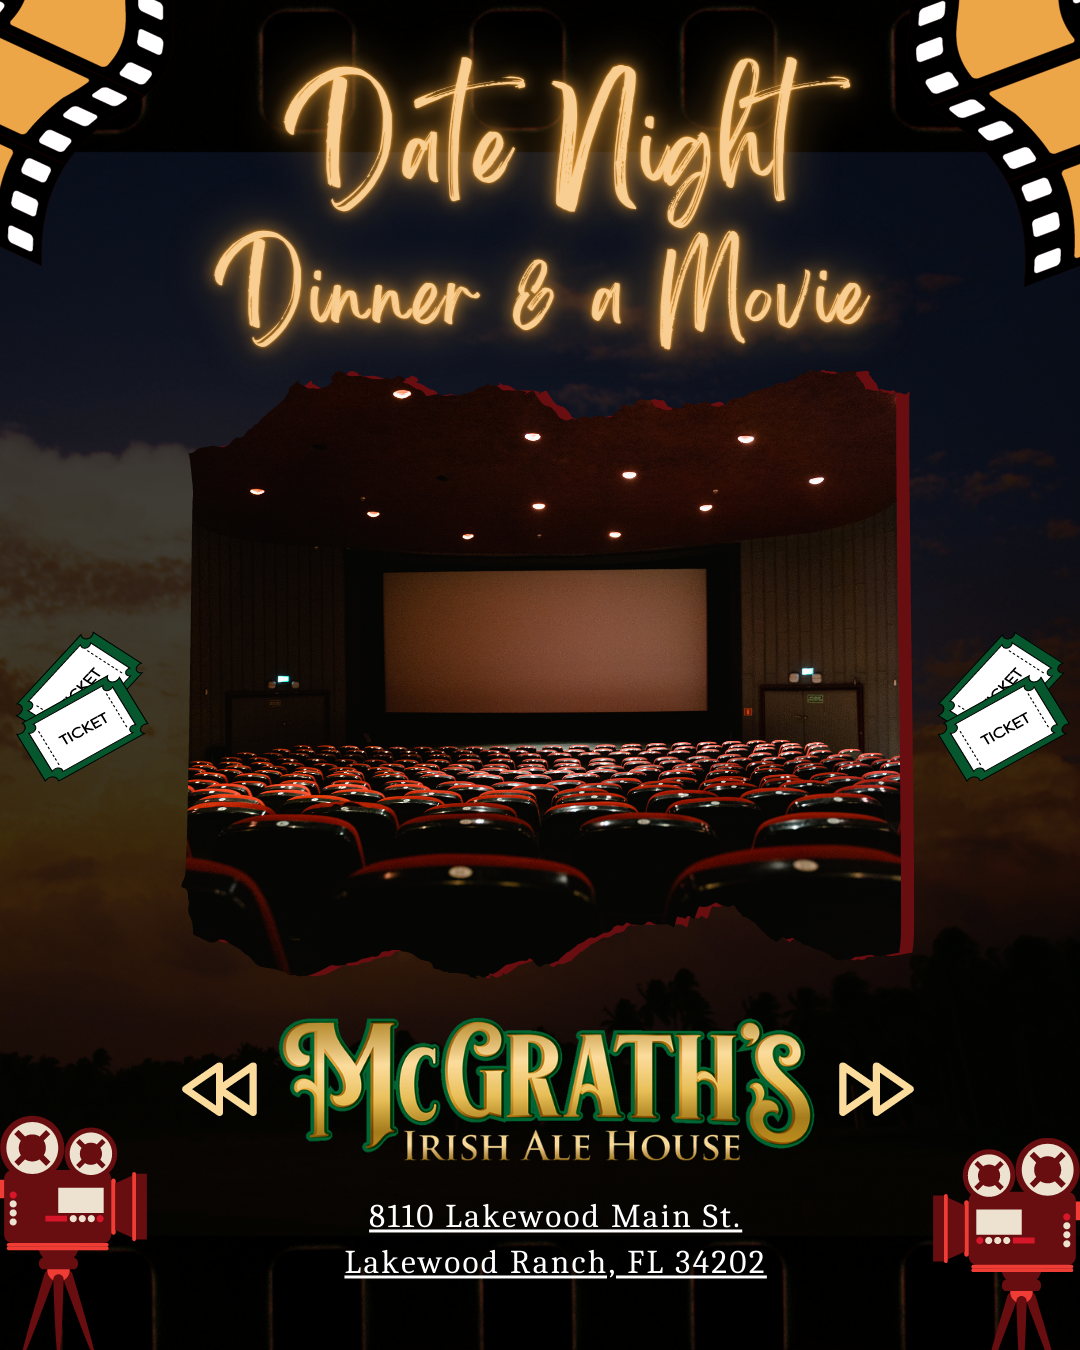 Dinner & A Movie: The Best Combination for Date Night